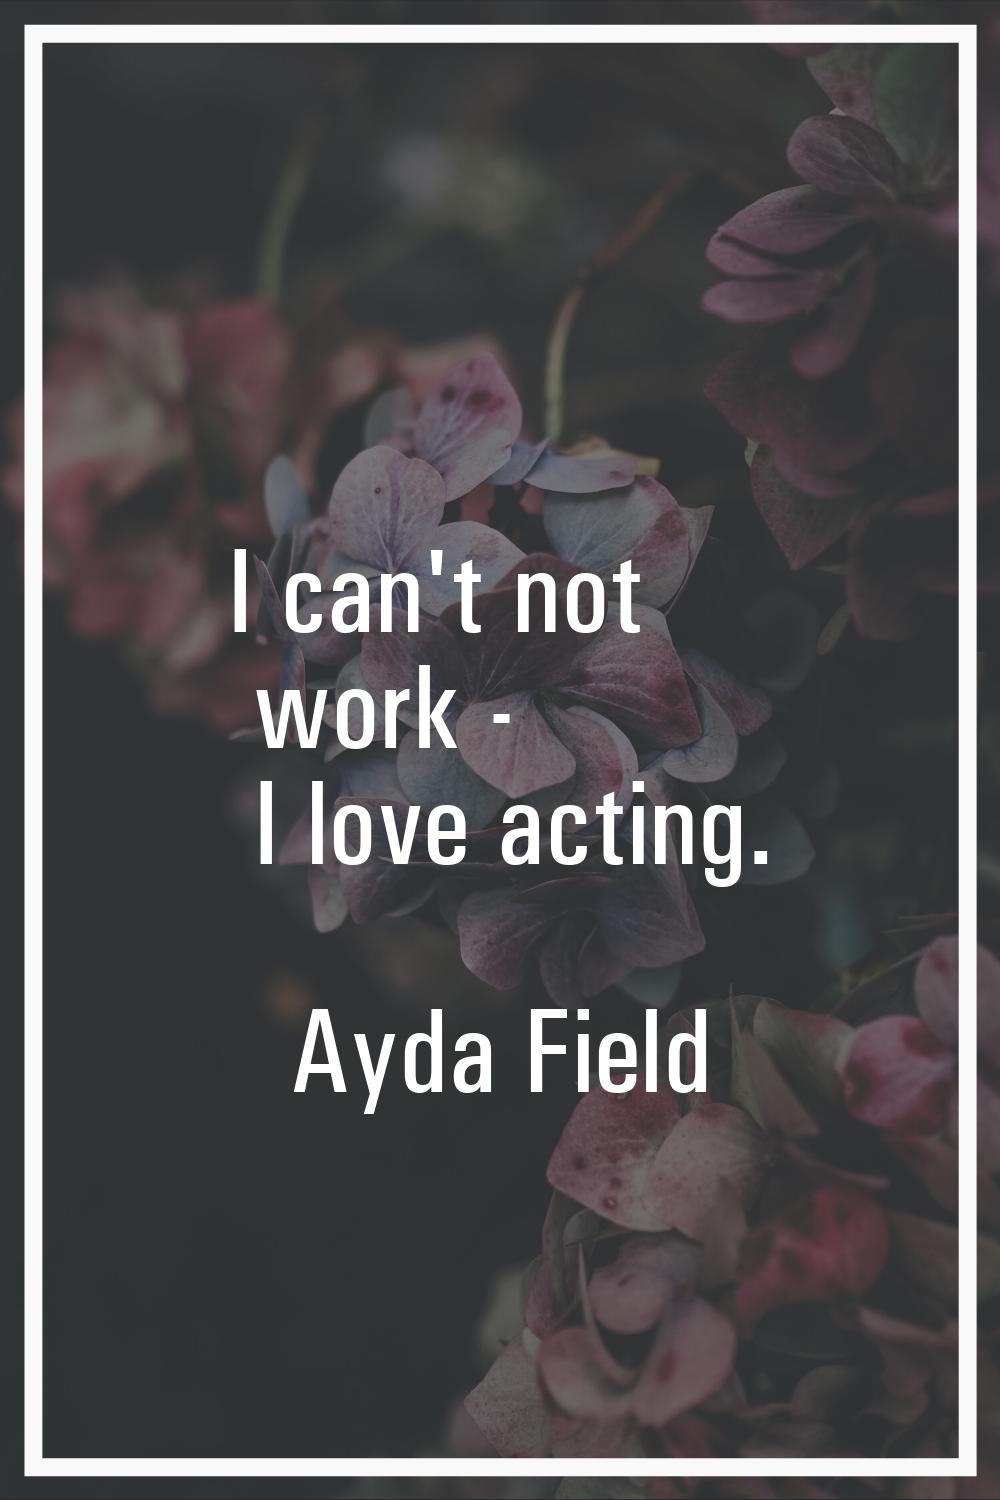 I can't not work - I love acting.